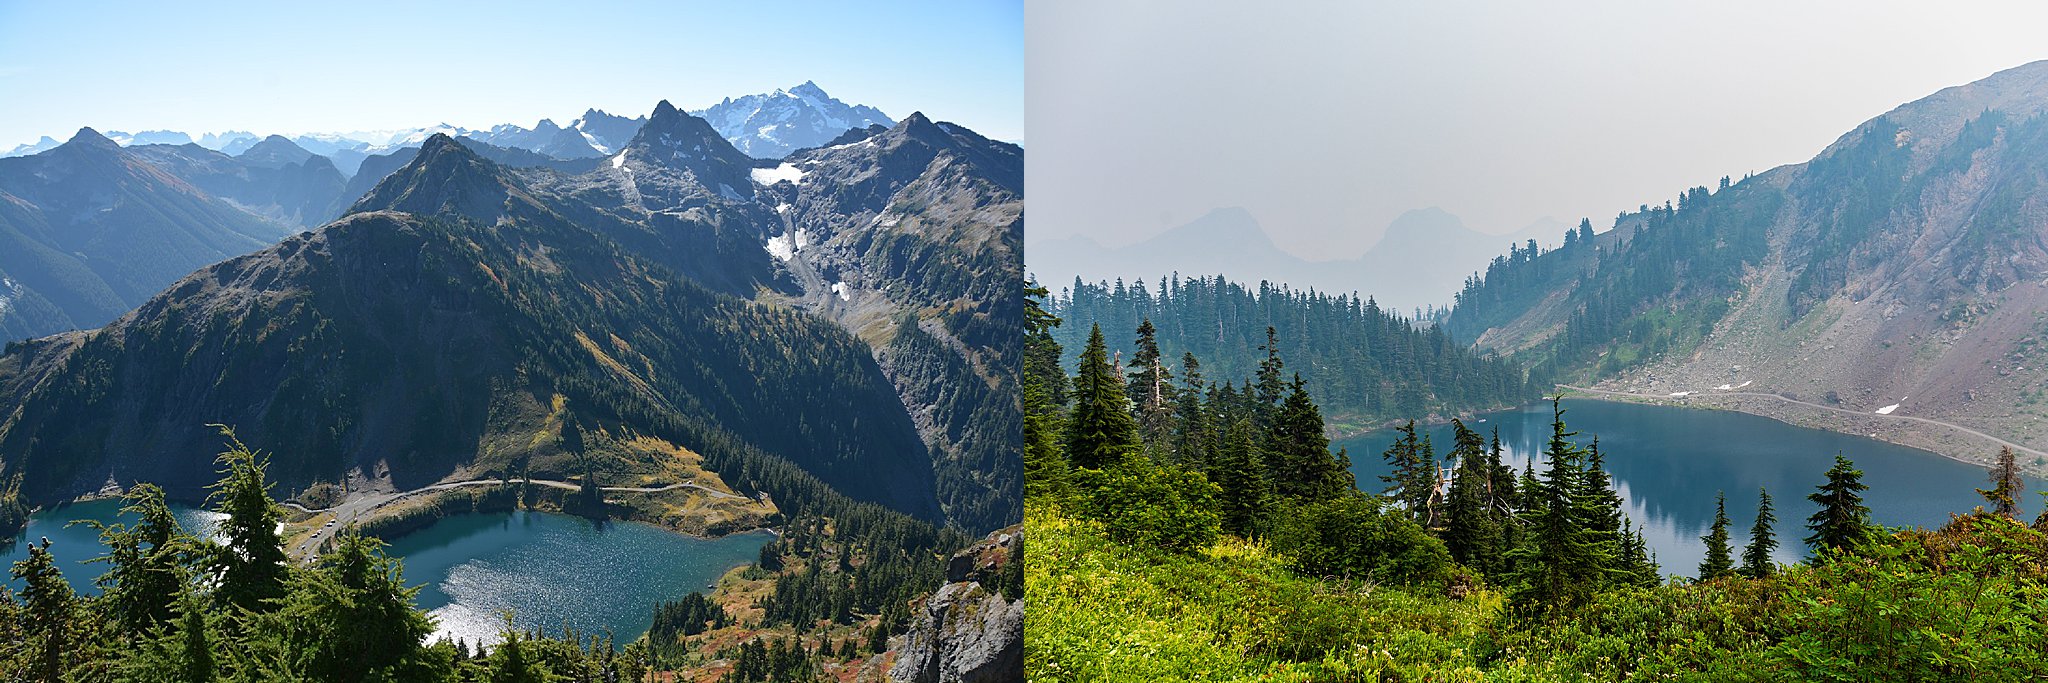 mount baker wilderness, mount baker, winchester mountain, winchester lookout, hike, 52 hike challenge, wildfire, dog friendly hike, washington, twin lakes trailhead